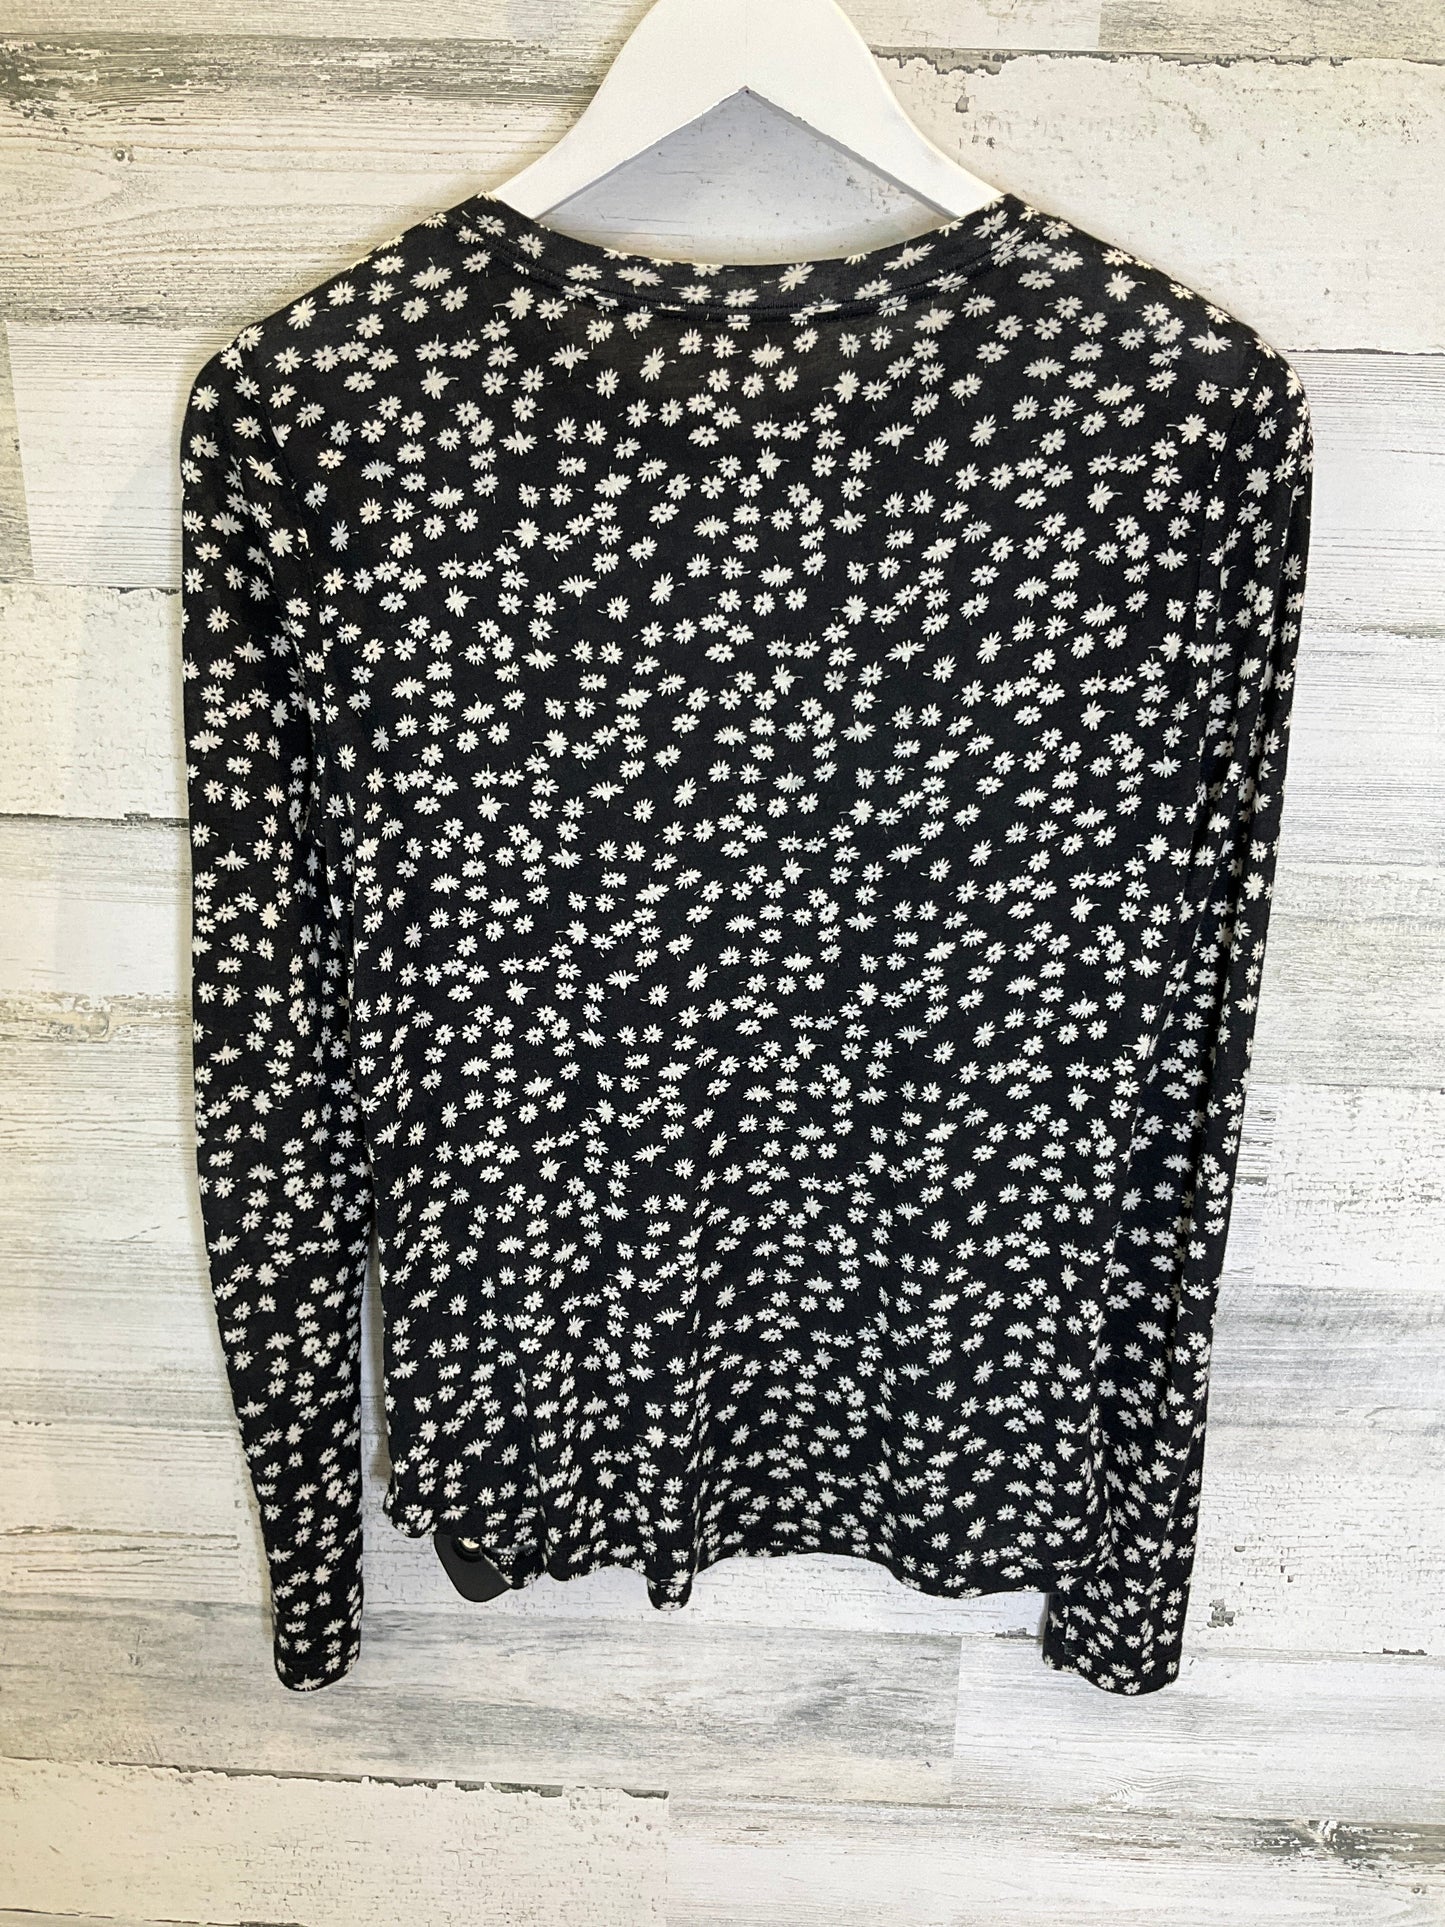 Black & White Top Long Sleeve Rebecca Taylor, Size S